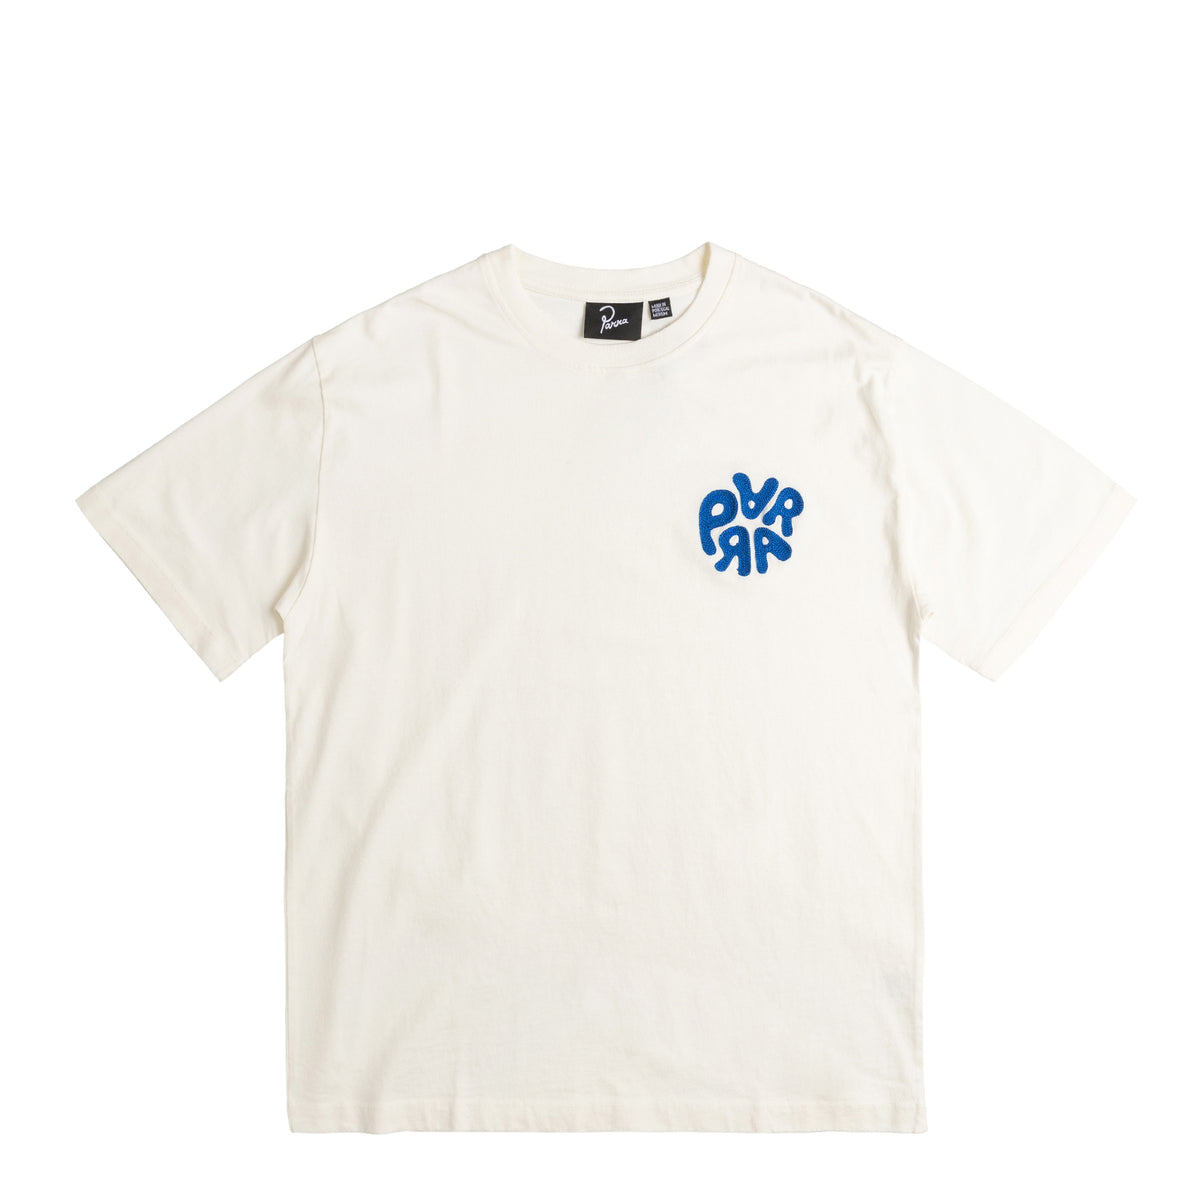 By Parra 1976 Logo T-Shirt » Buy online now!